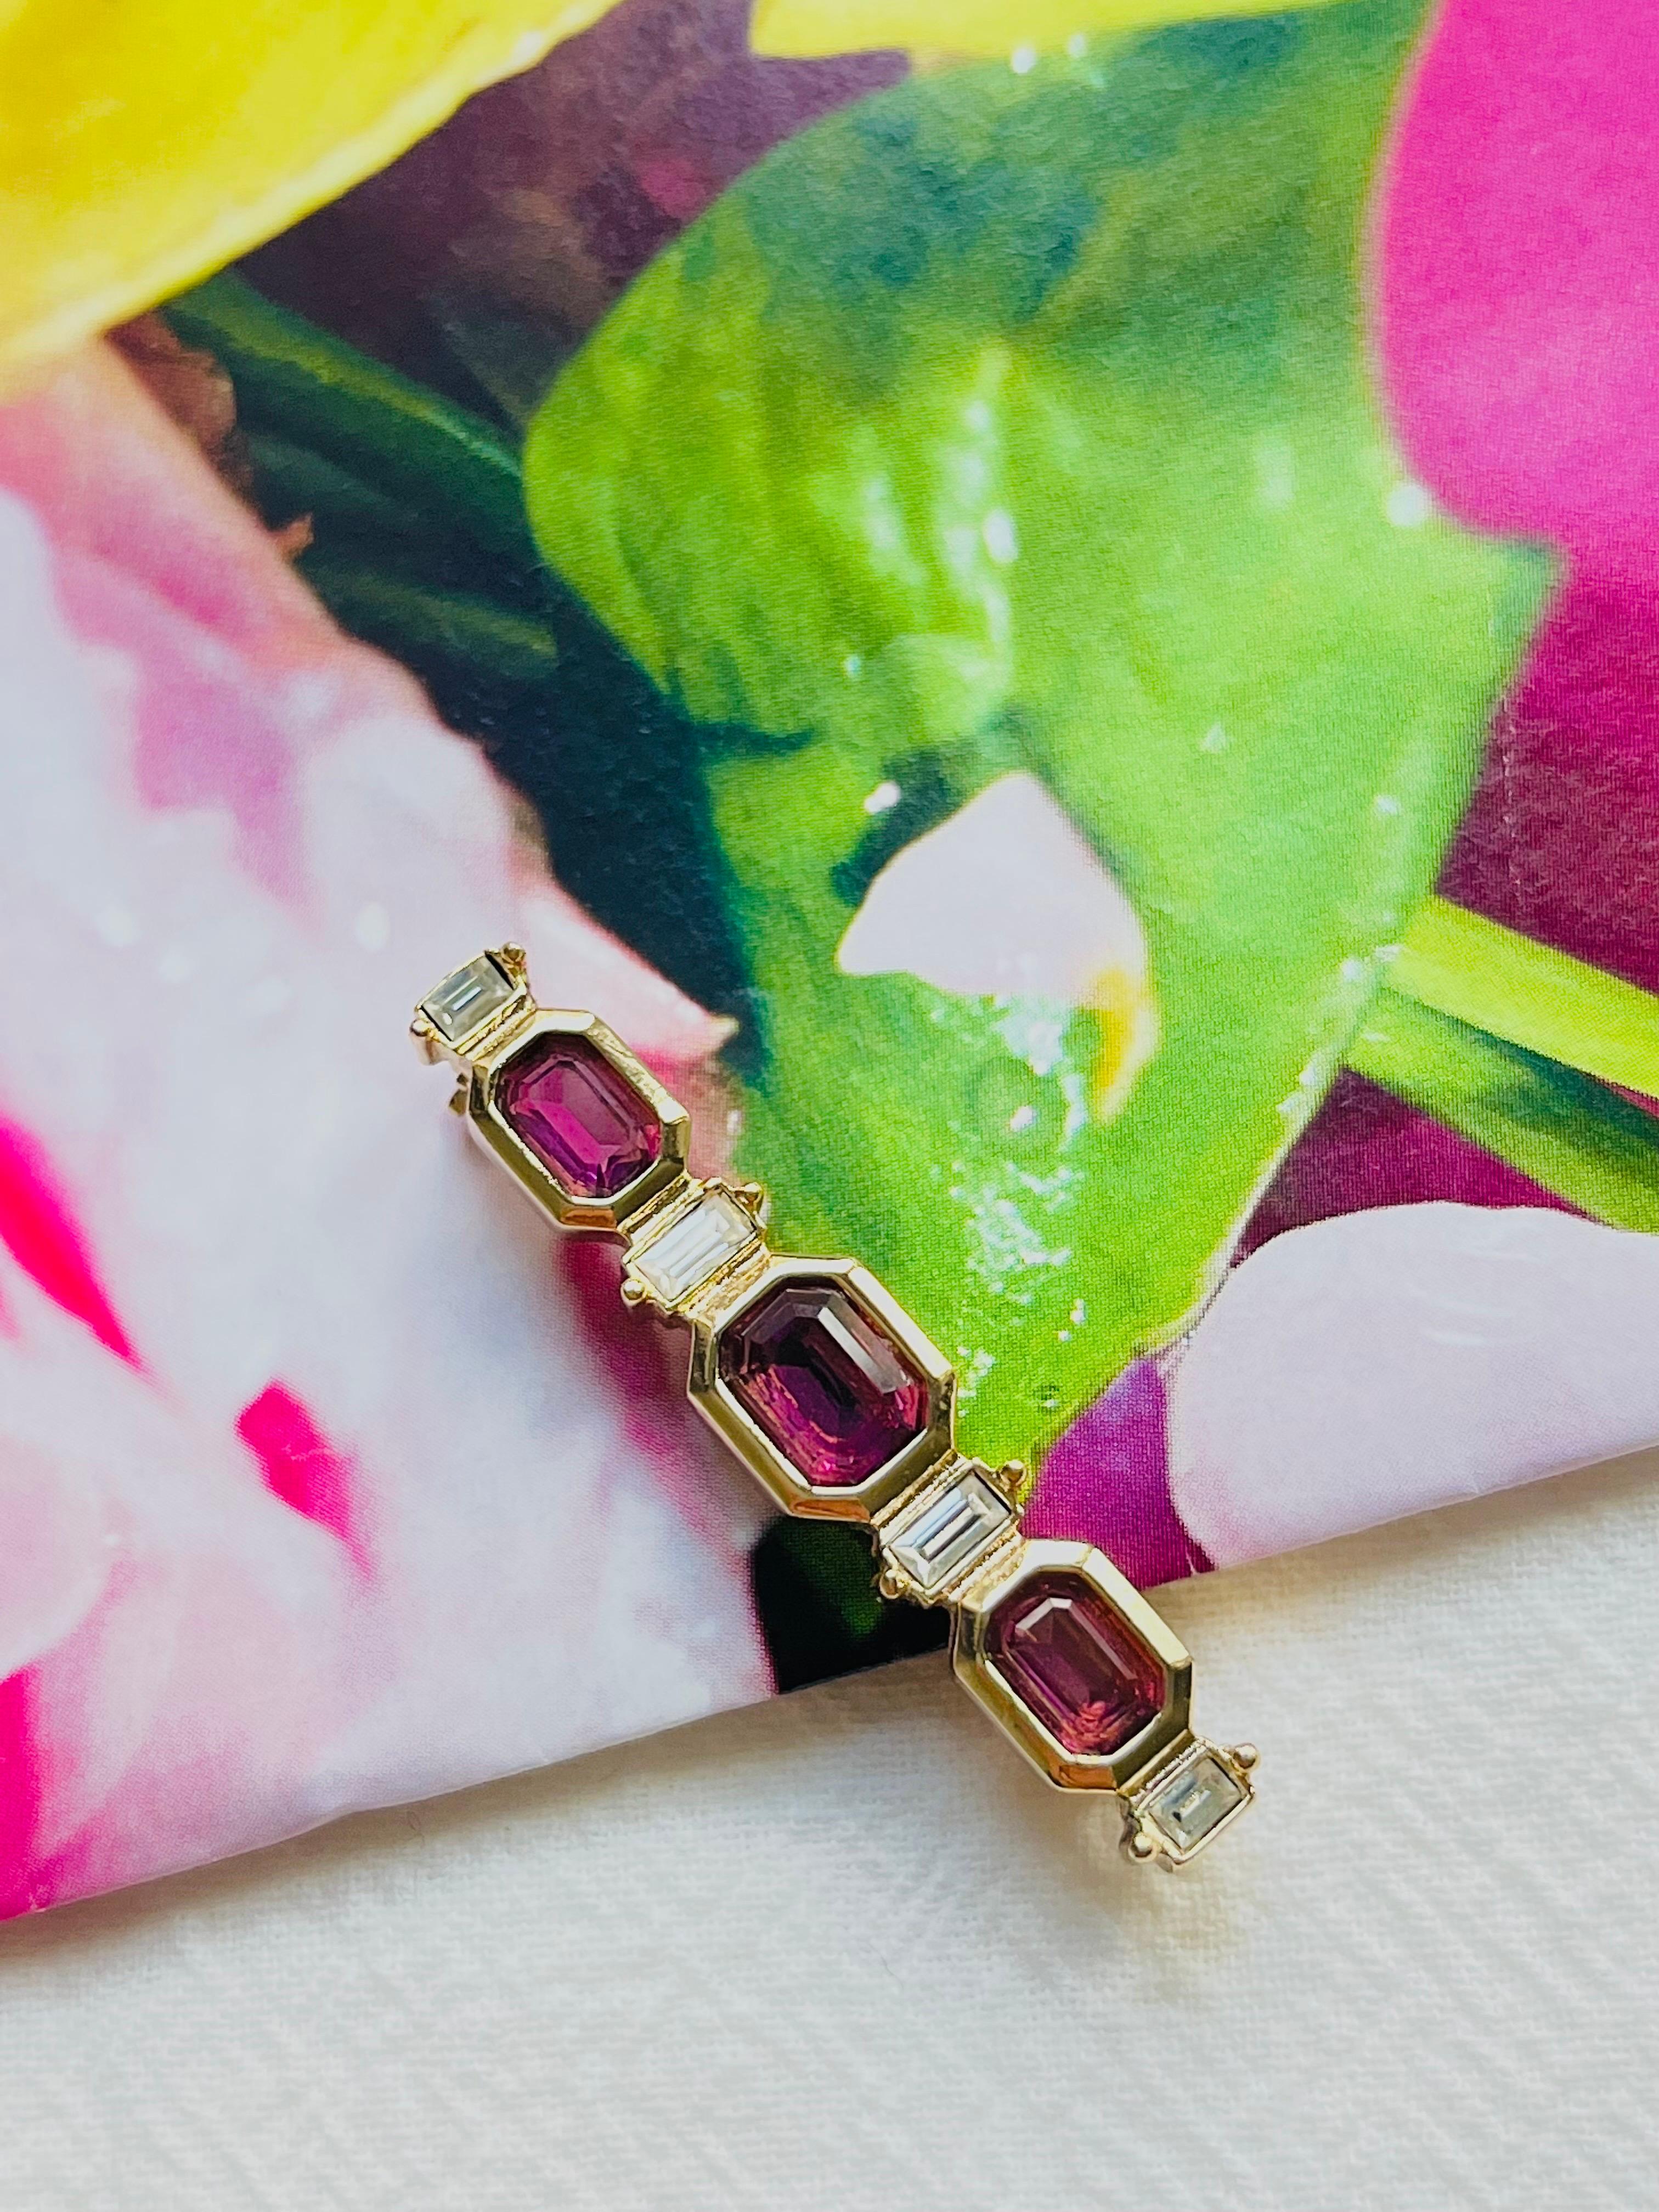 Christian Dior Vintage 1980s Trio Amethyst Octagon Rectangle Long Bar Brooch In Excellent Condition For Sale In Wokingham, England